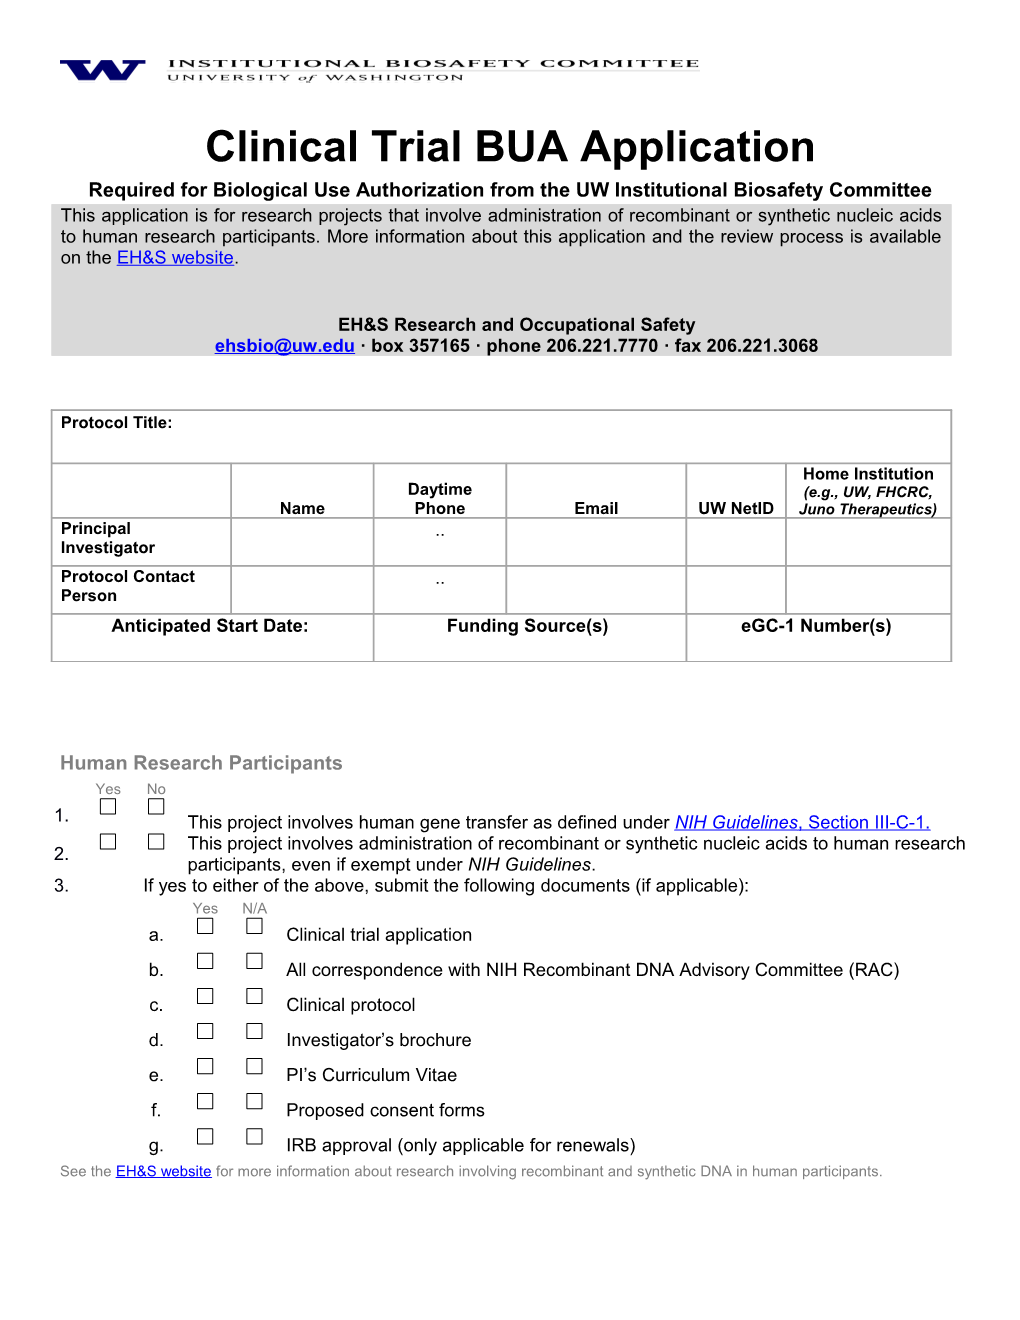 Required for Biological Use Authorization from the UW Institutional Biosafety Committee